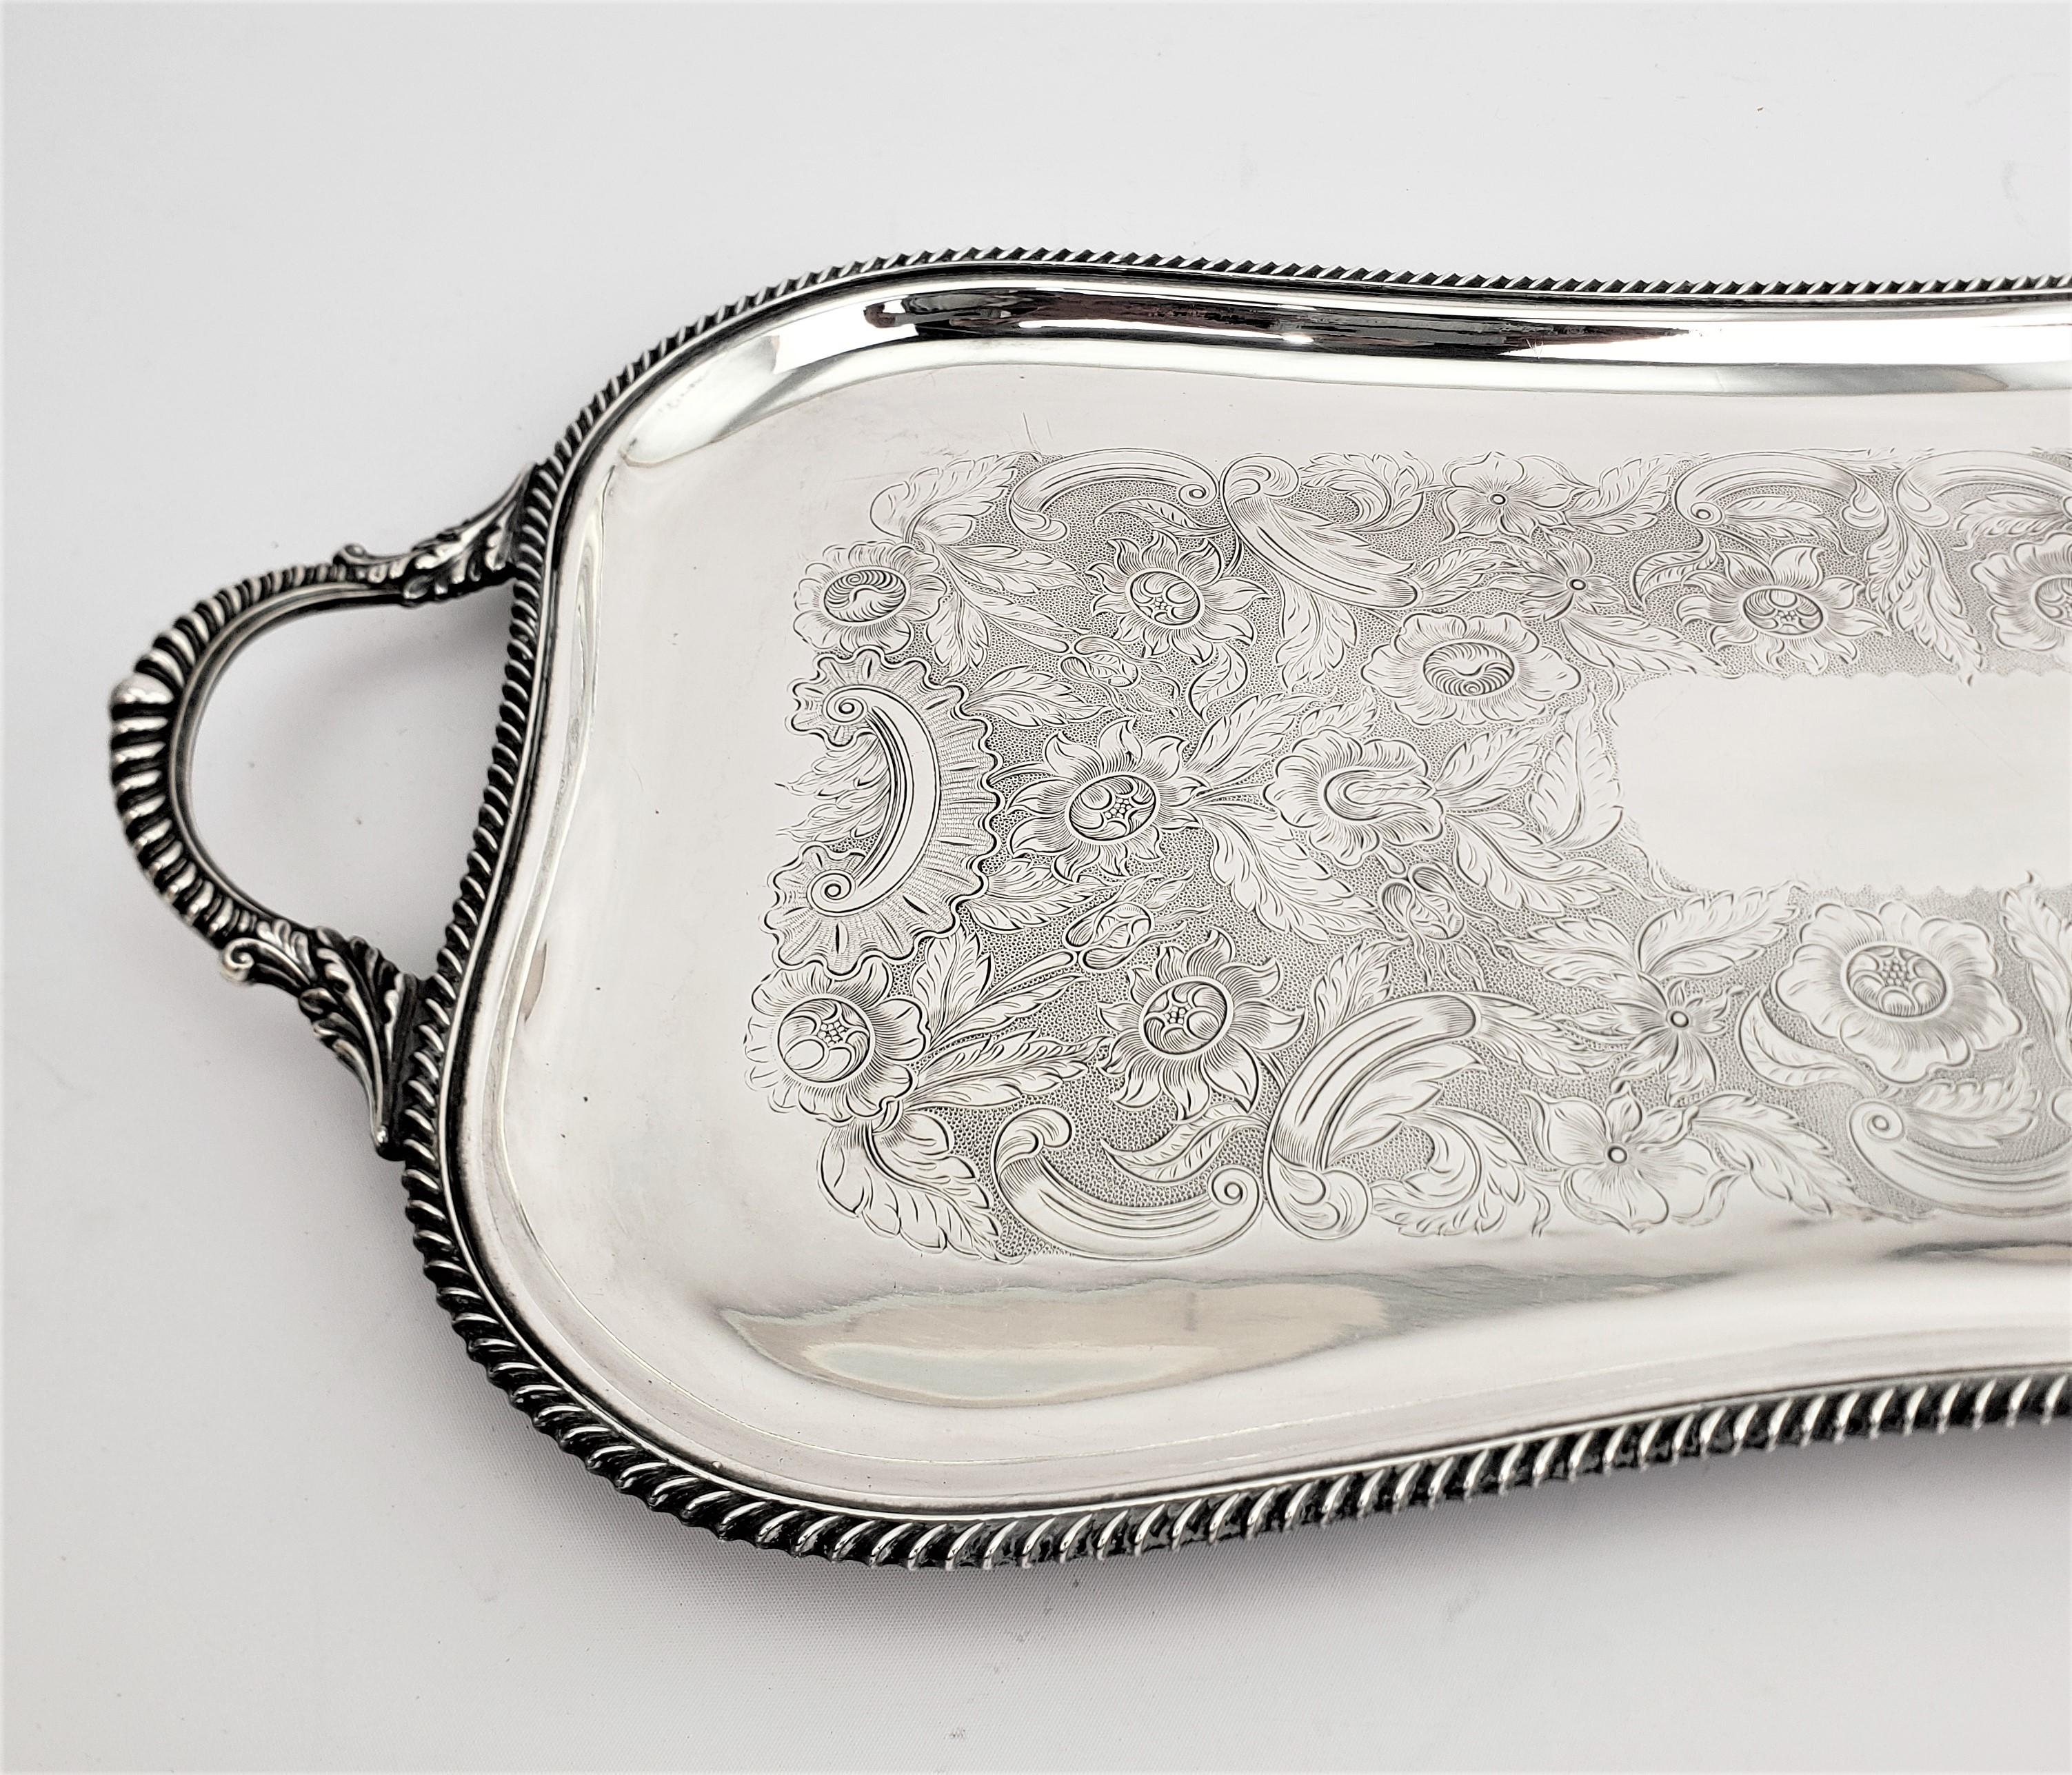 American Antique Birks Silver Plated Rectangular Serving Tray with Floral Engraving For Sale